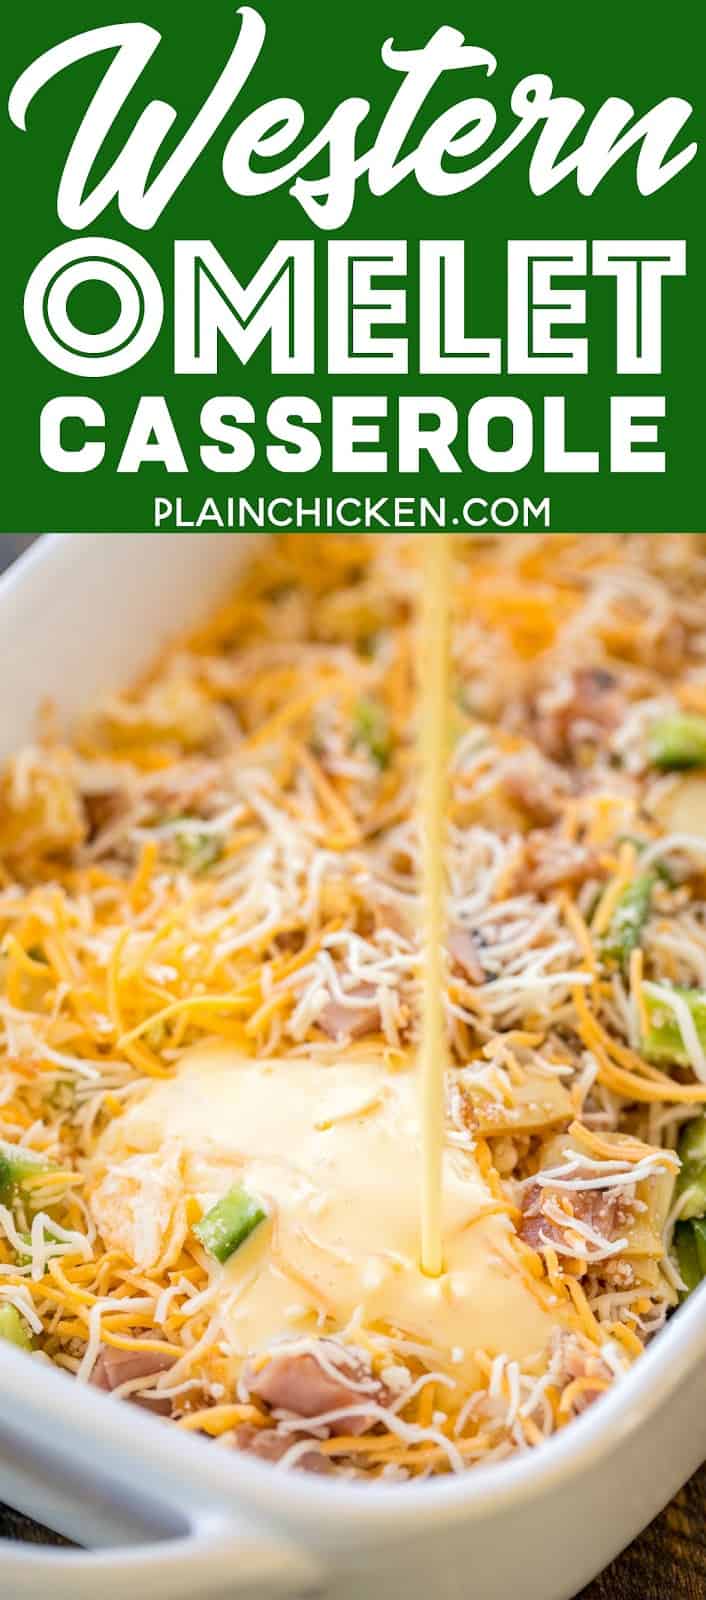 Western Omelet Casserole - perfect for breakfast, lunch or dinner. Ham, onion, bell pepper, artichokes, salsa, eggs, sour cream and cheese. No crust, so it is a great low-carb option. Only 4.5 Weight Watcher points per serving!! #casserole #omelet #breakfast